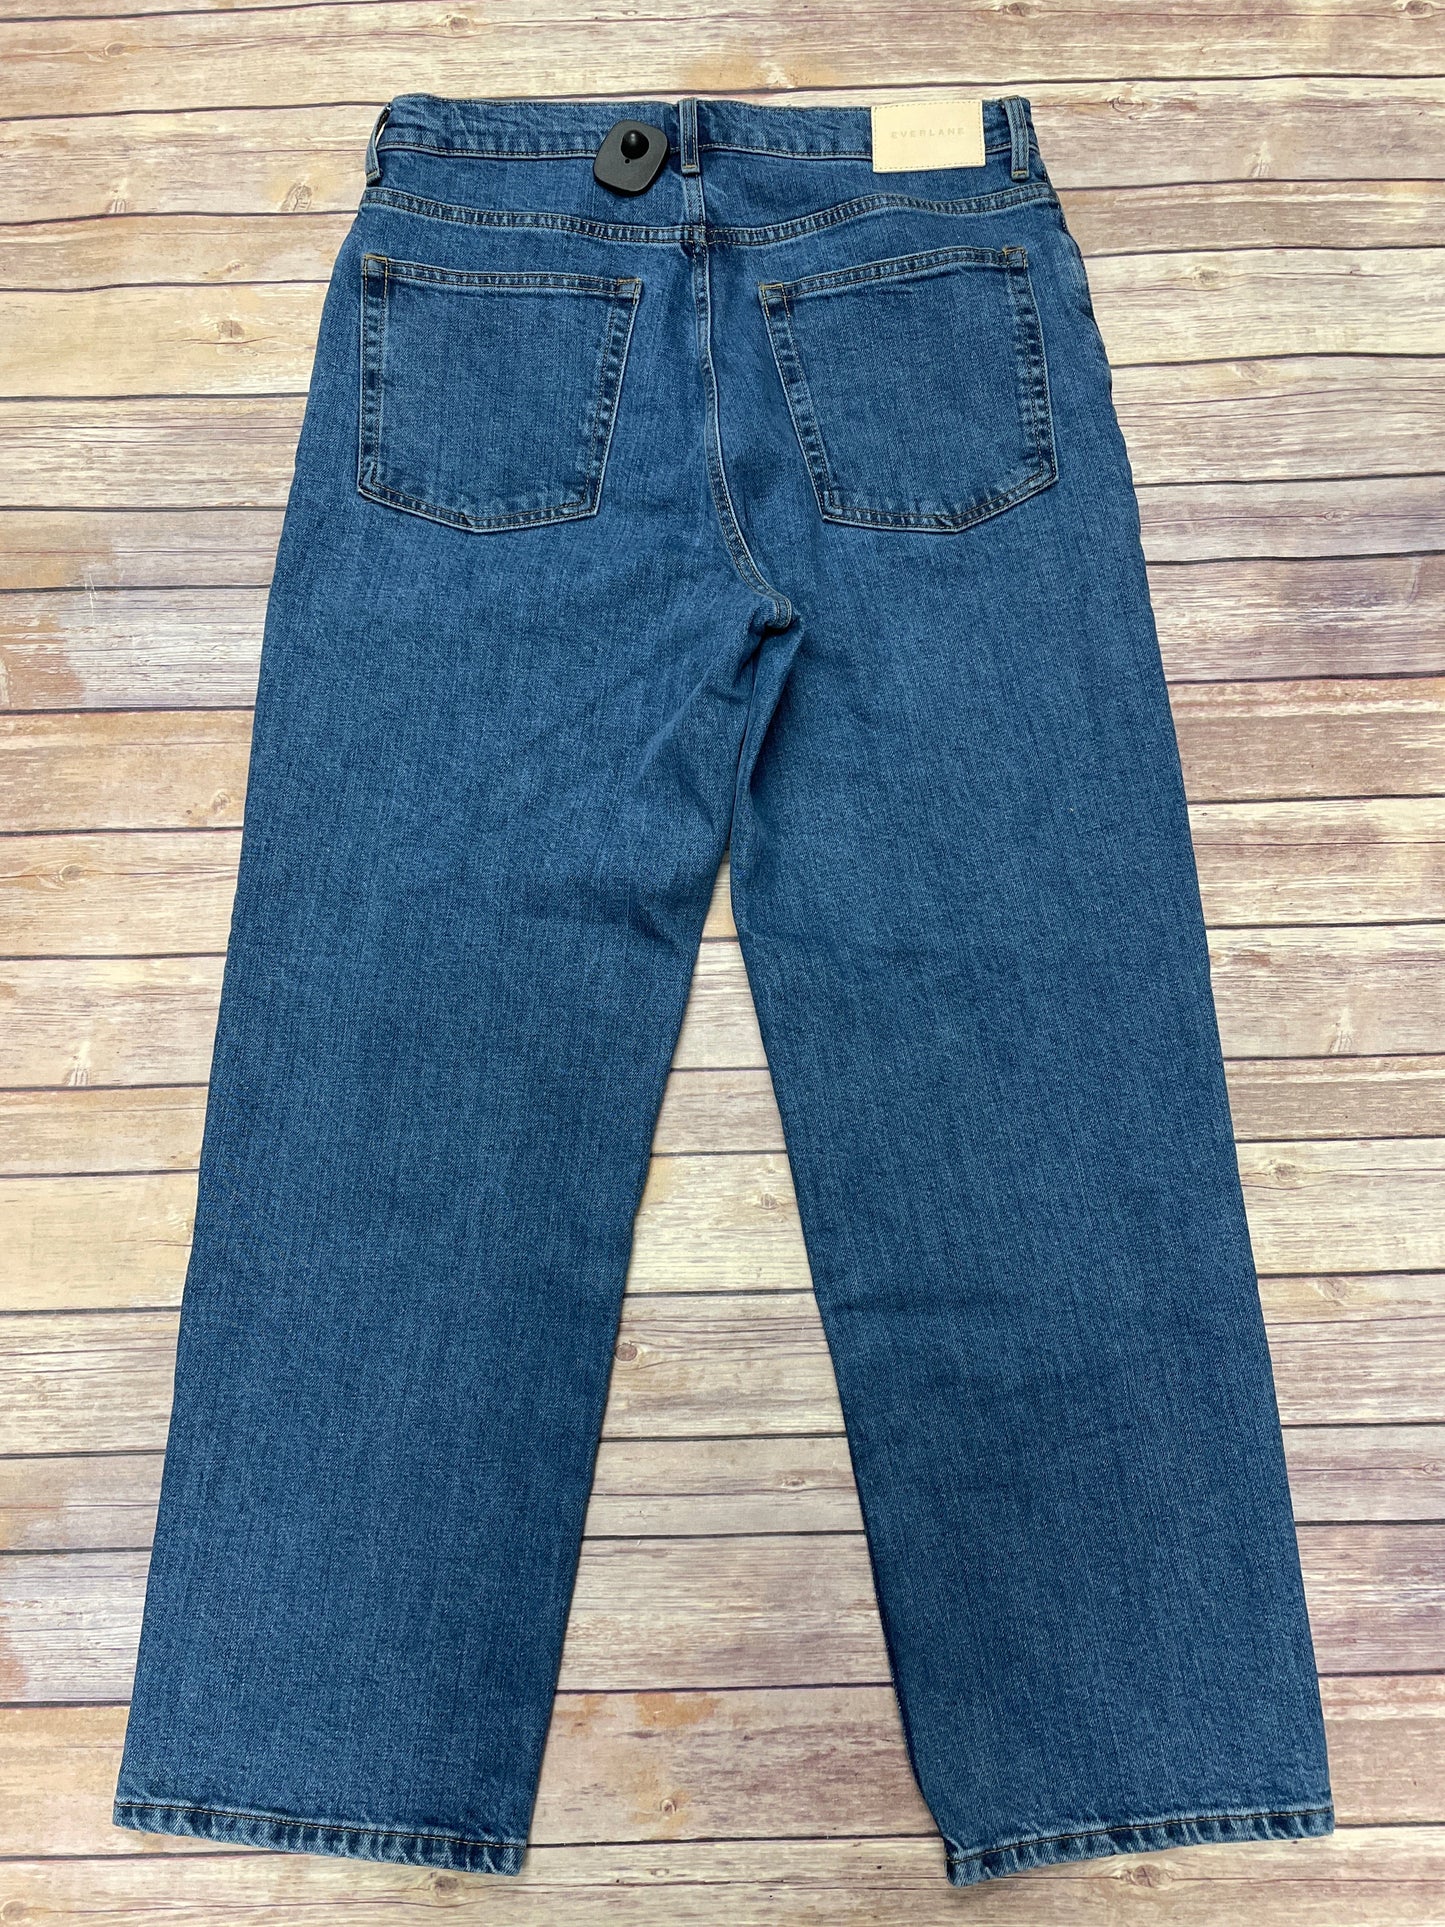 Jeans Straight By Everlane  Size: 12 Long